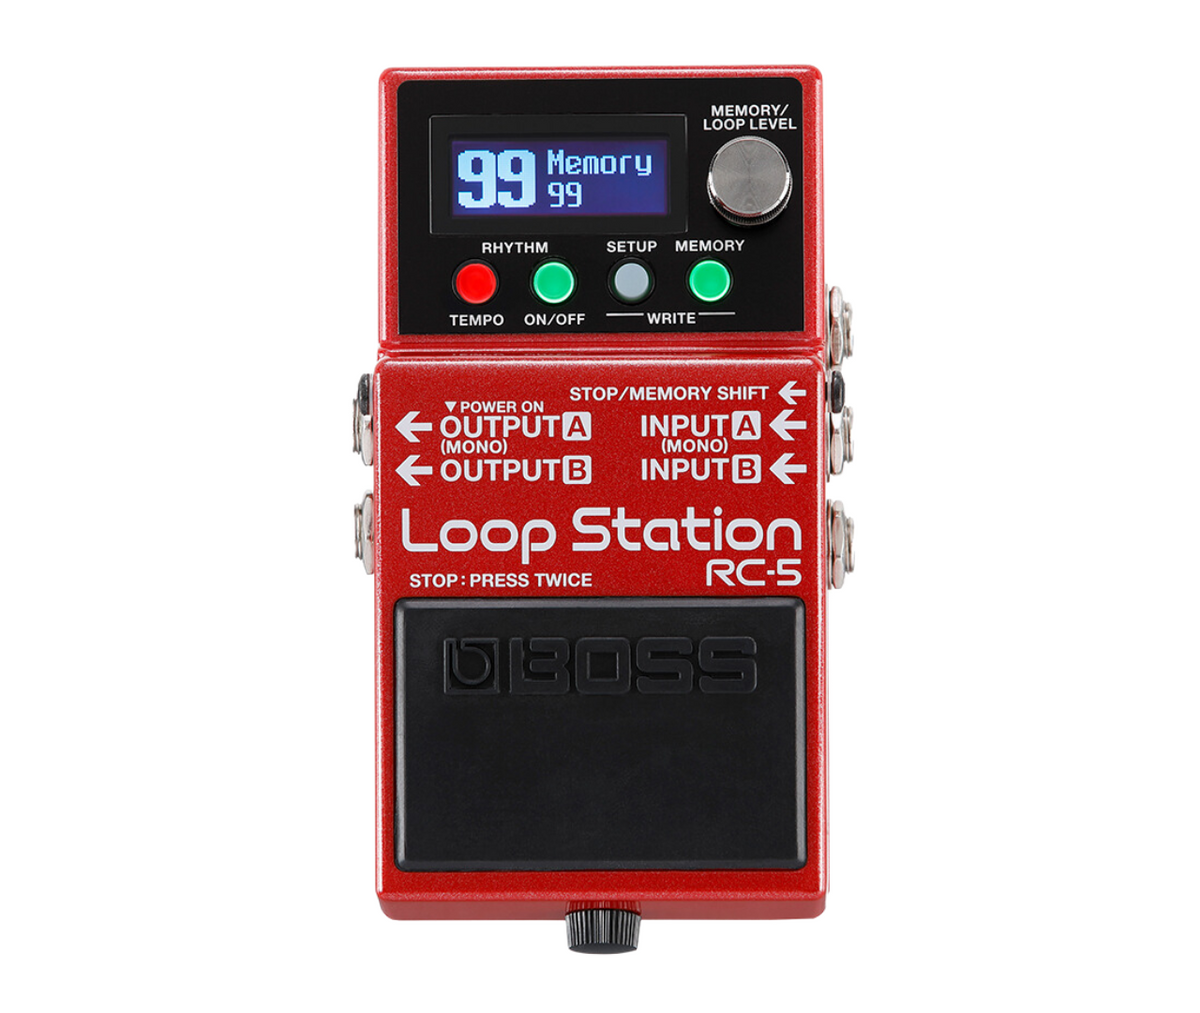 BOSS RC-5 Best Guitar Loop Station Stereo Looper with 13 Hours Recording Time and 7 Drum Kits and 57 Preset Rhythms